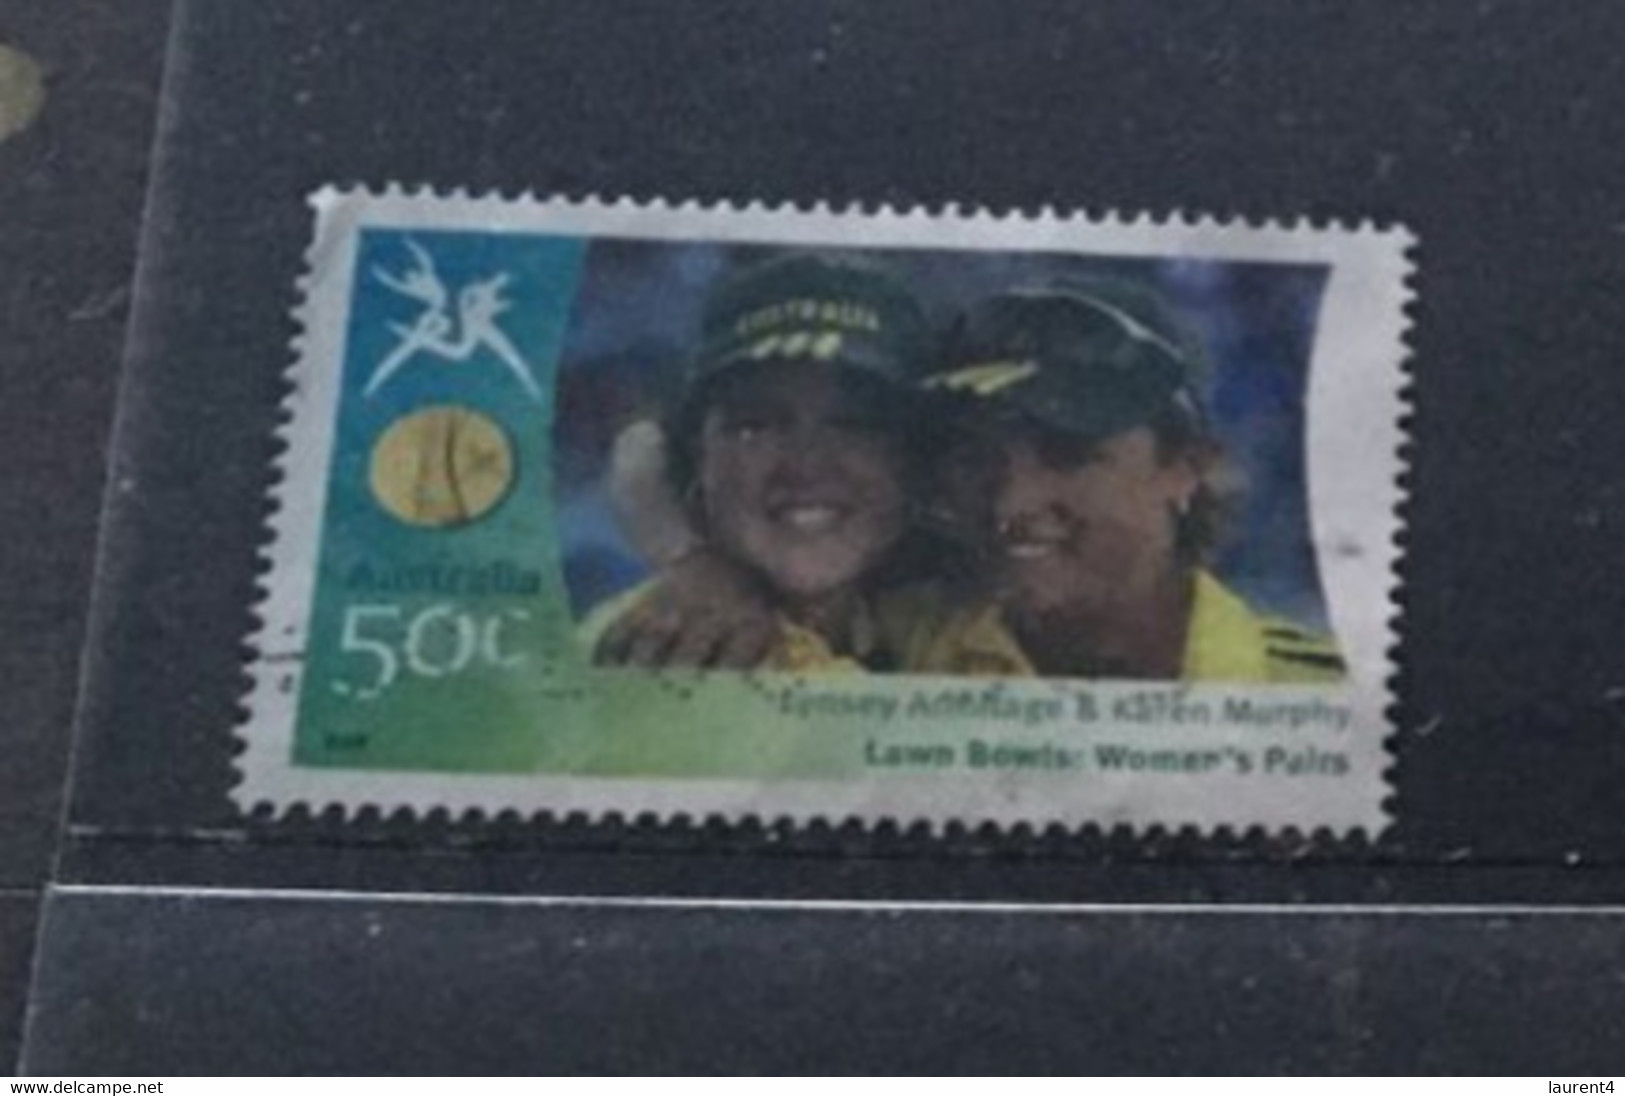 (stamp 17-7-2021) Australia Use Stamp (scarce) - Melbourne Commonweatlh Games Gold Medalist - Lawn Bowls - Bowls